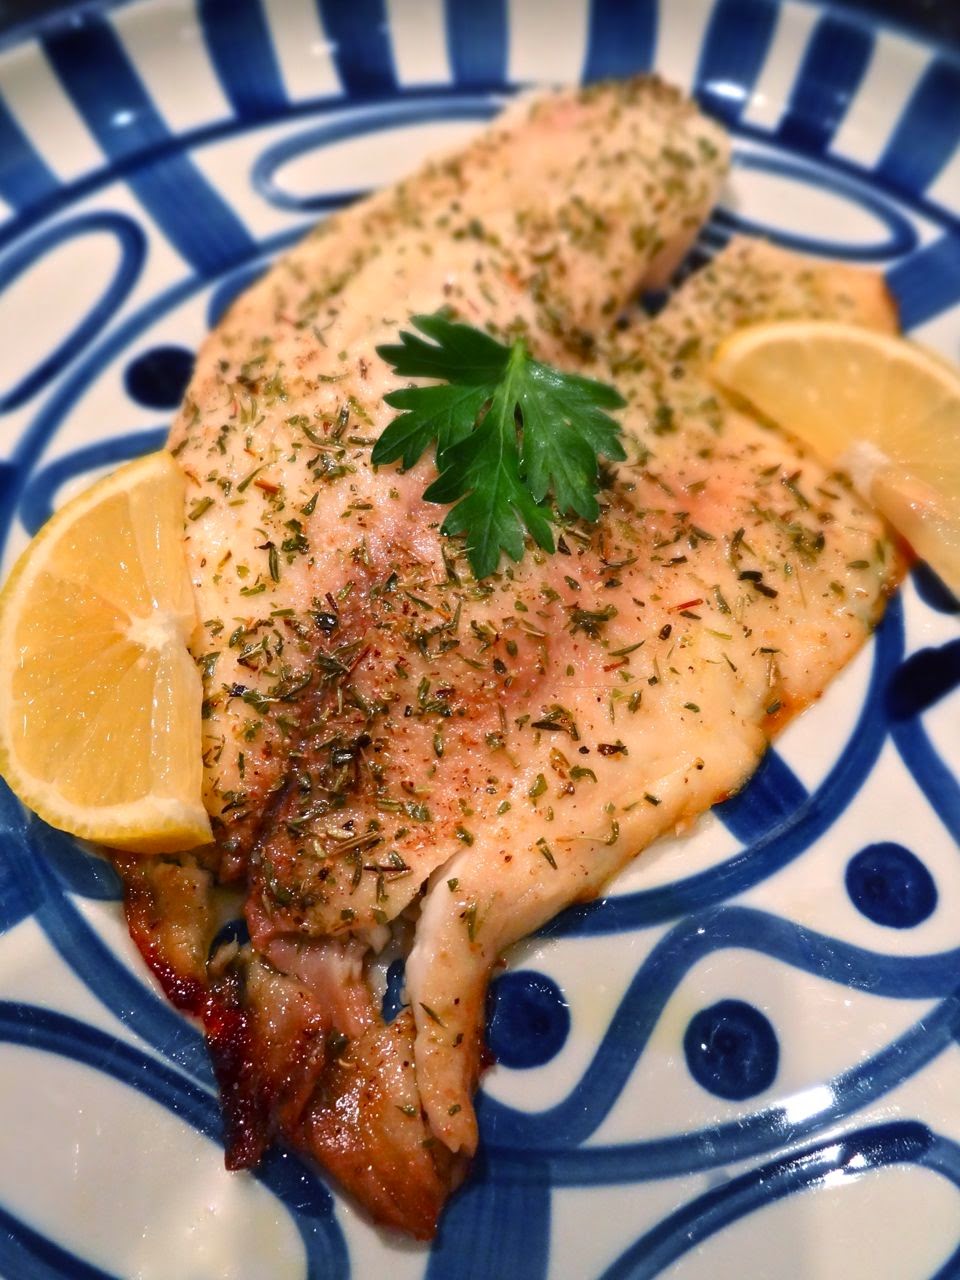 Scrumpdillyicious: Oven-Baked Tilapia with Herbes de Provence